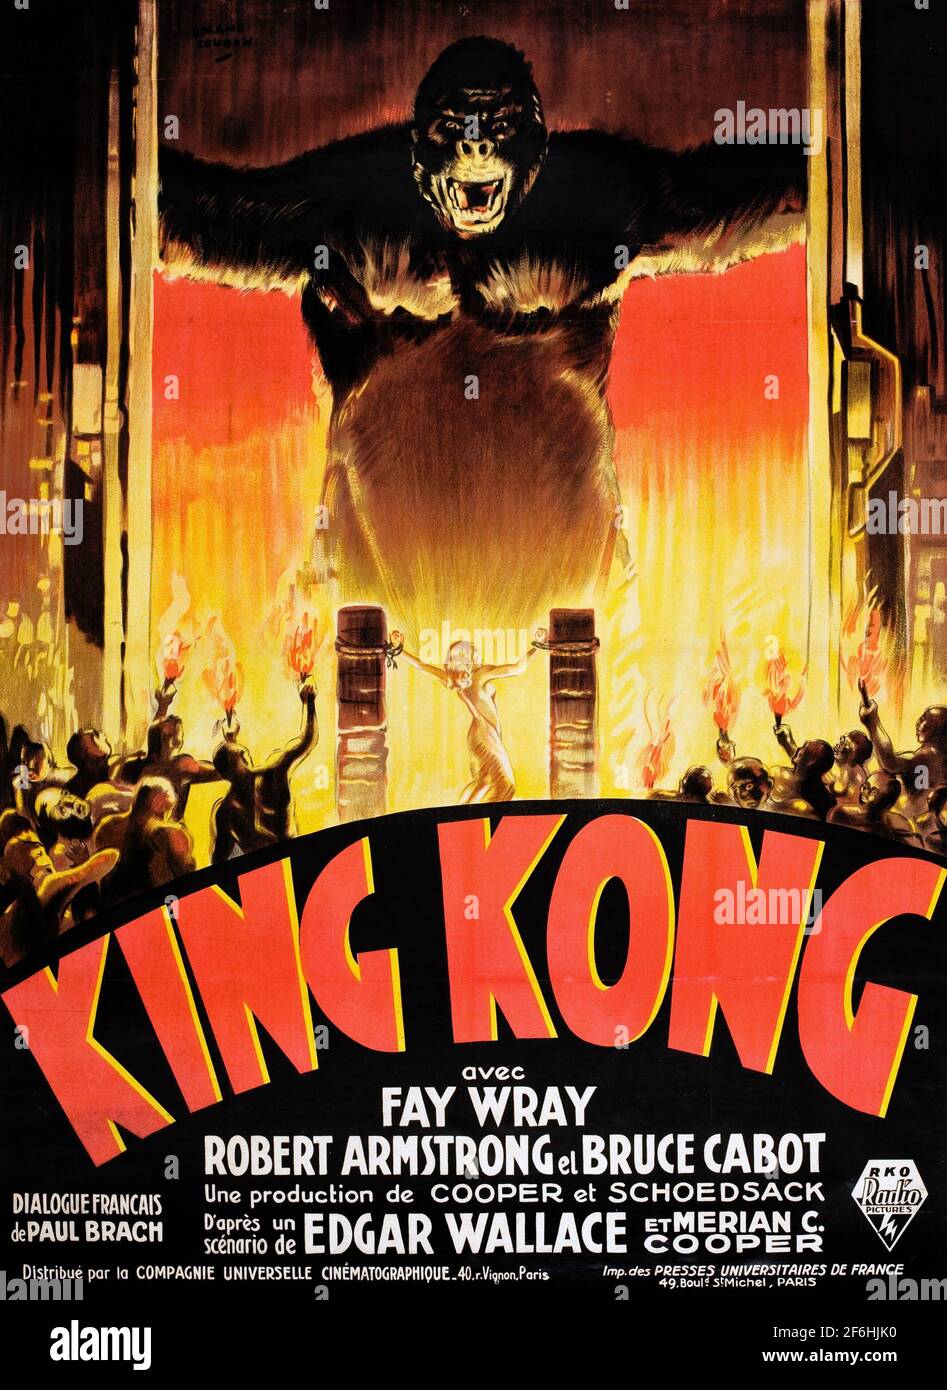 King Kong, movie poster 1933. Featuring Fay Wray, Bruce Cabot, Robert Armstrong, Frank Reicher. Adventure / Fantasy / Action / Romance. French version Stock Photo